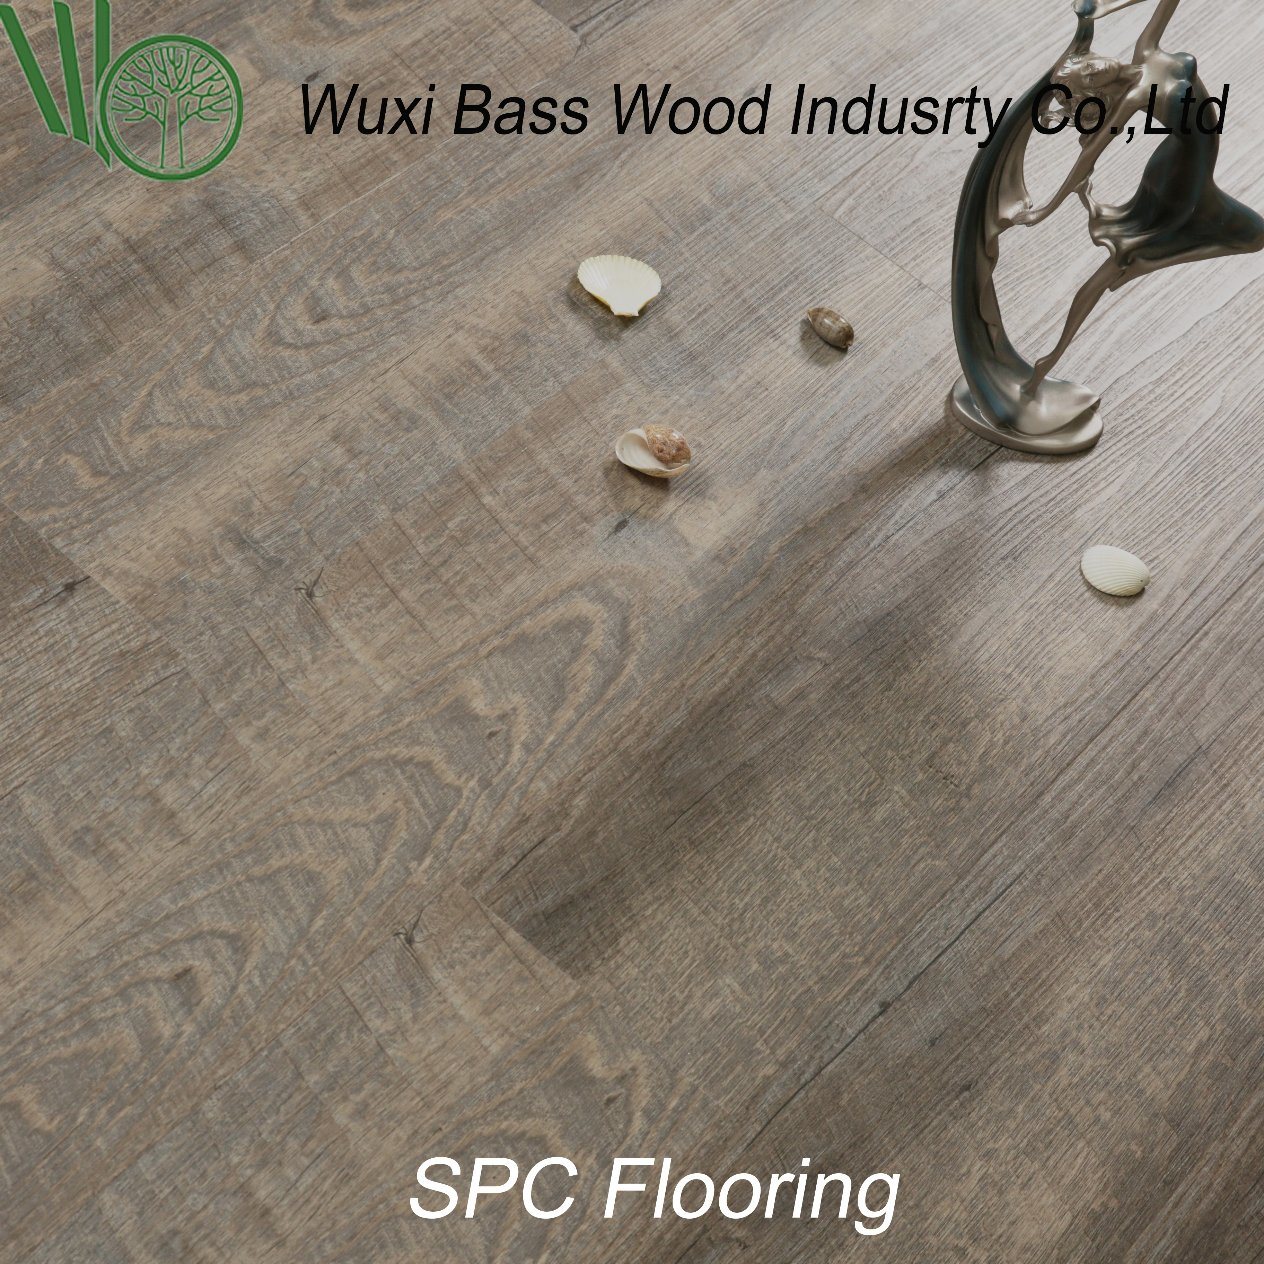 The Newest Product, Spc Flooring with Competitive Price